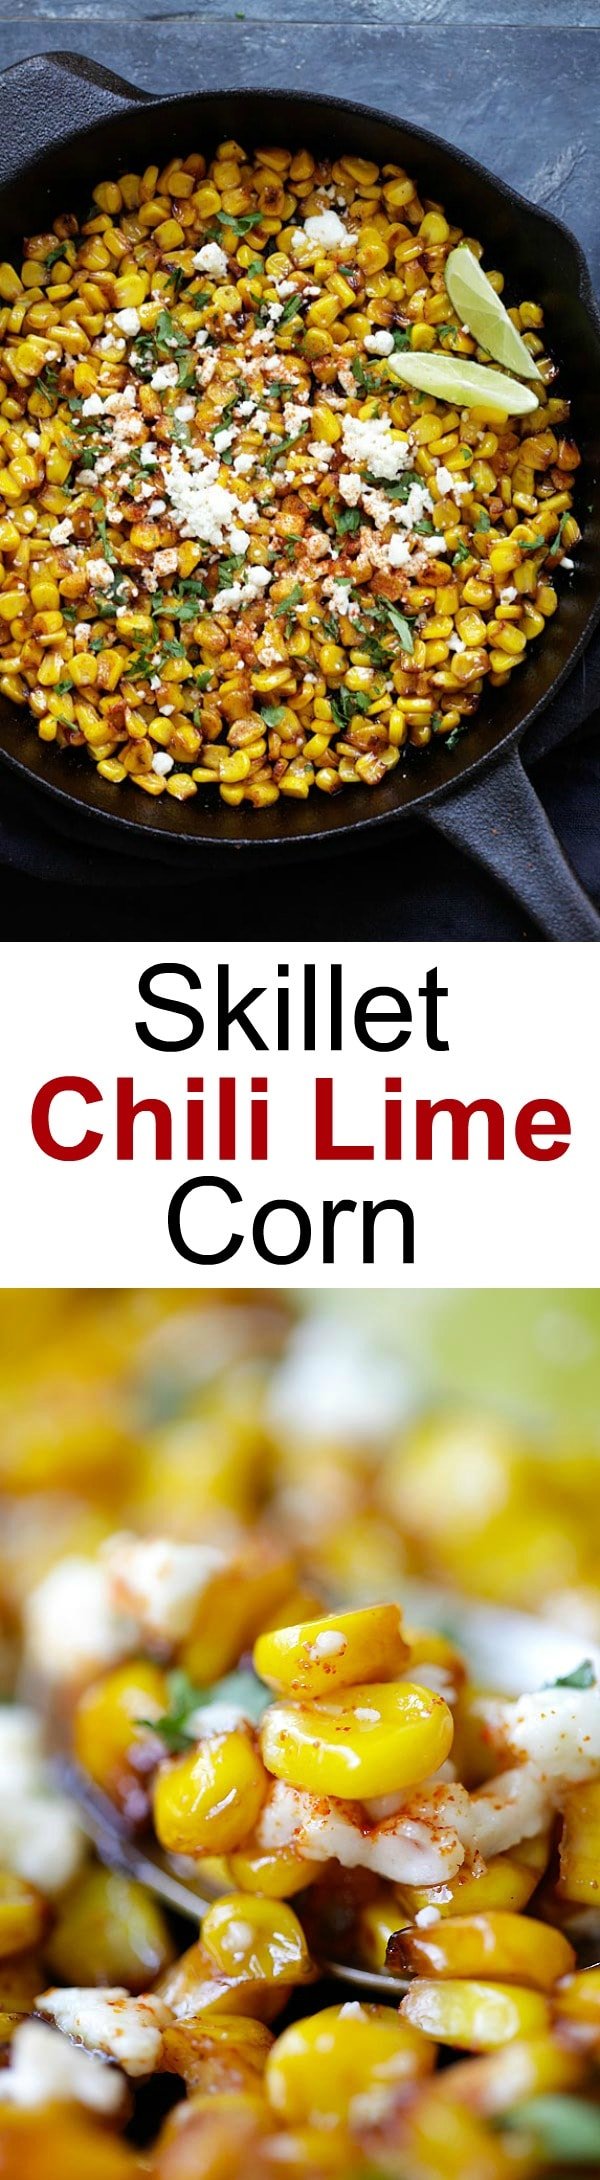 Skillet Chili Lime Corn - the best corn with chili, honey, lime and cheese. Takes 15 mins to make and a perfect side dish for any meals | rasamalaysia.com